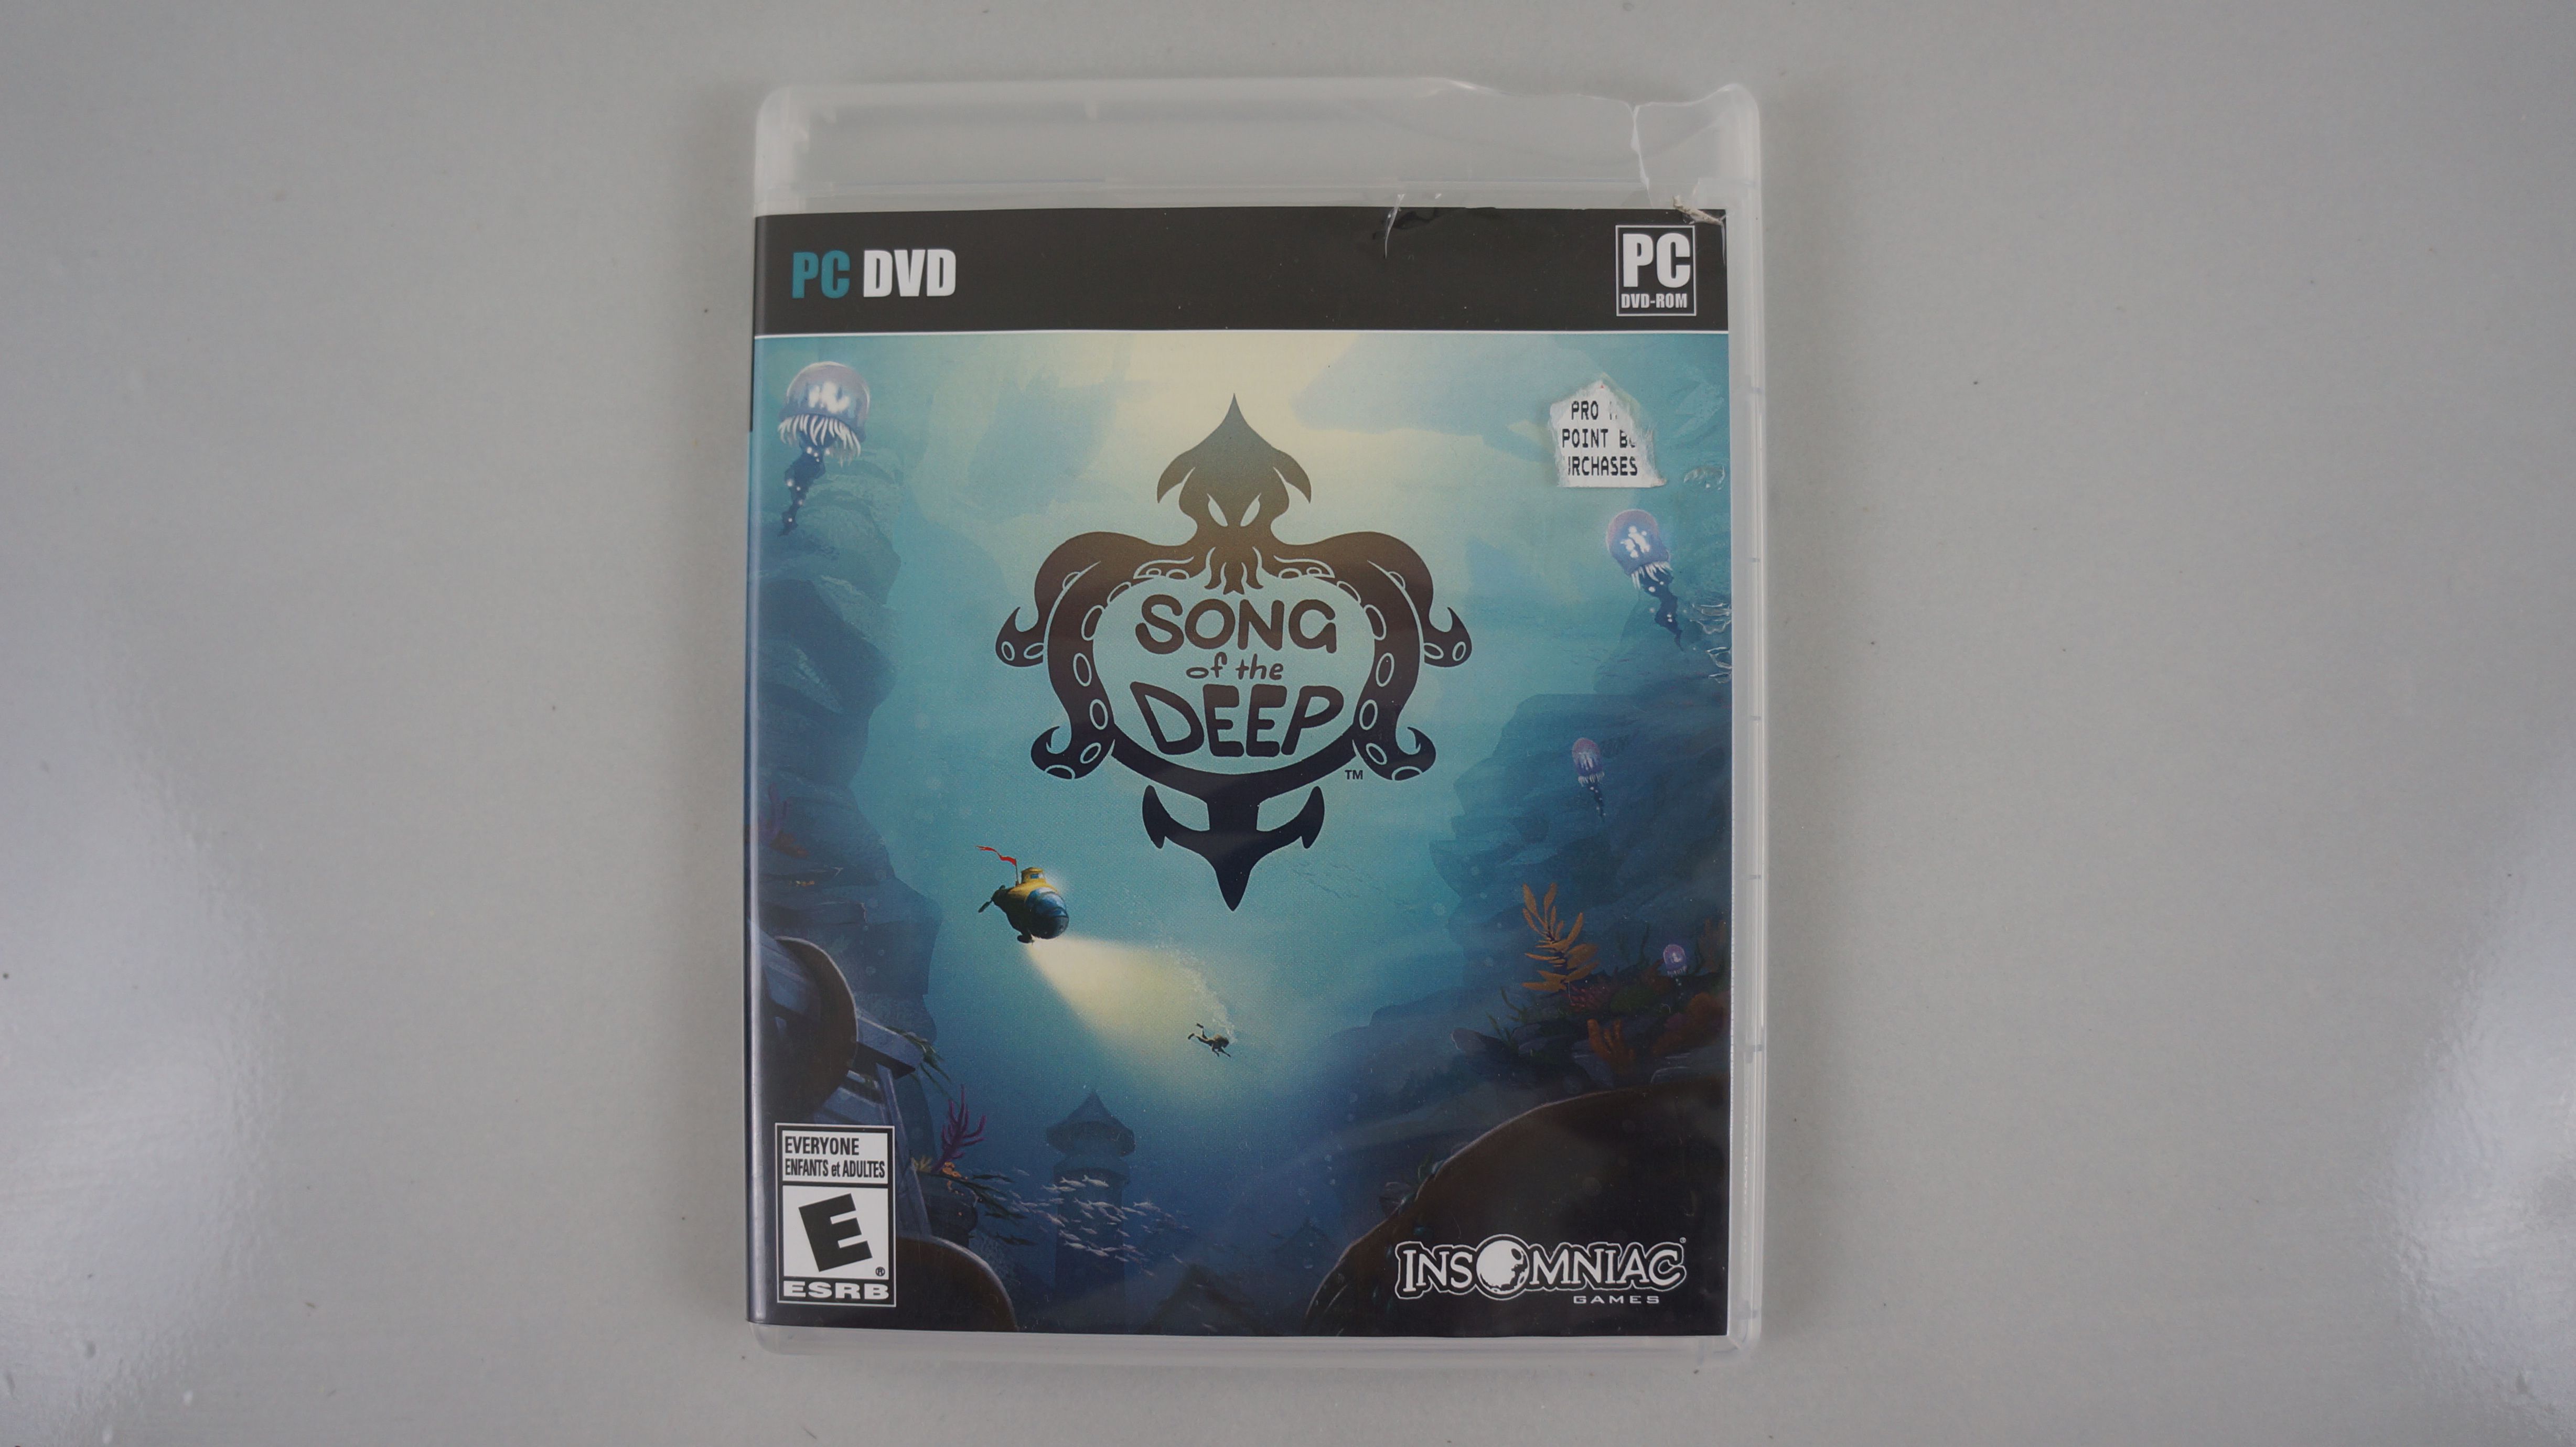 Song of the Deep PC - With Activation Keys